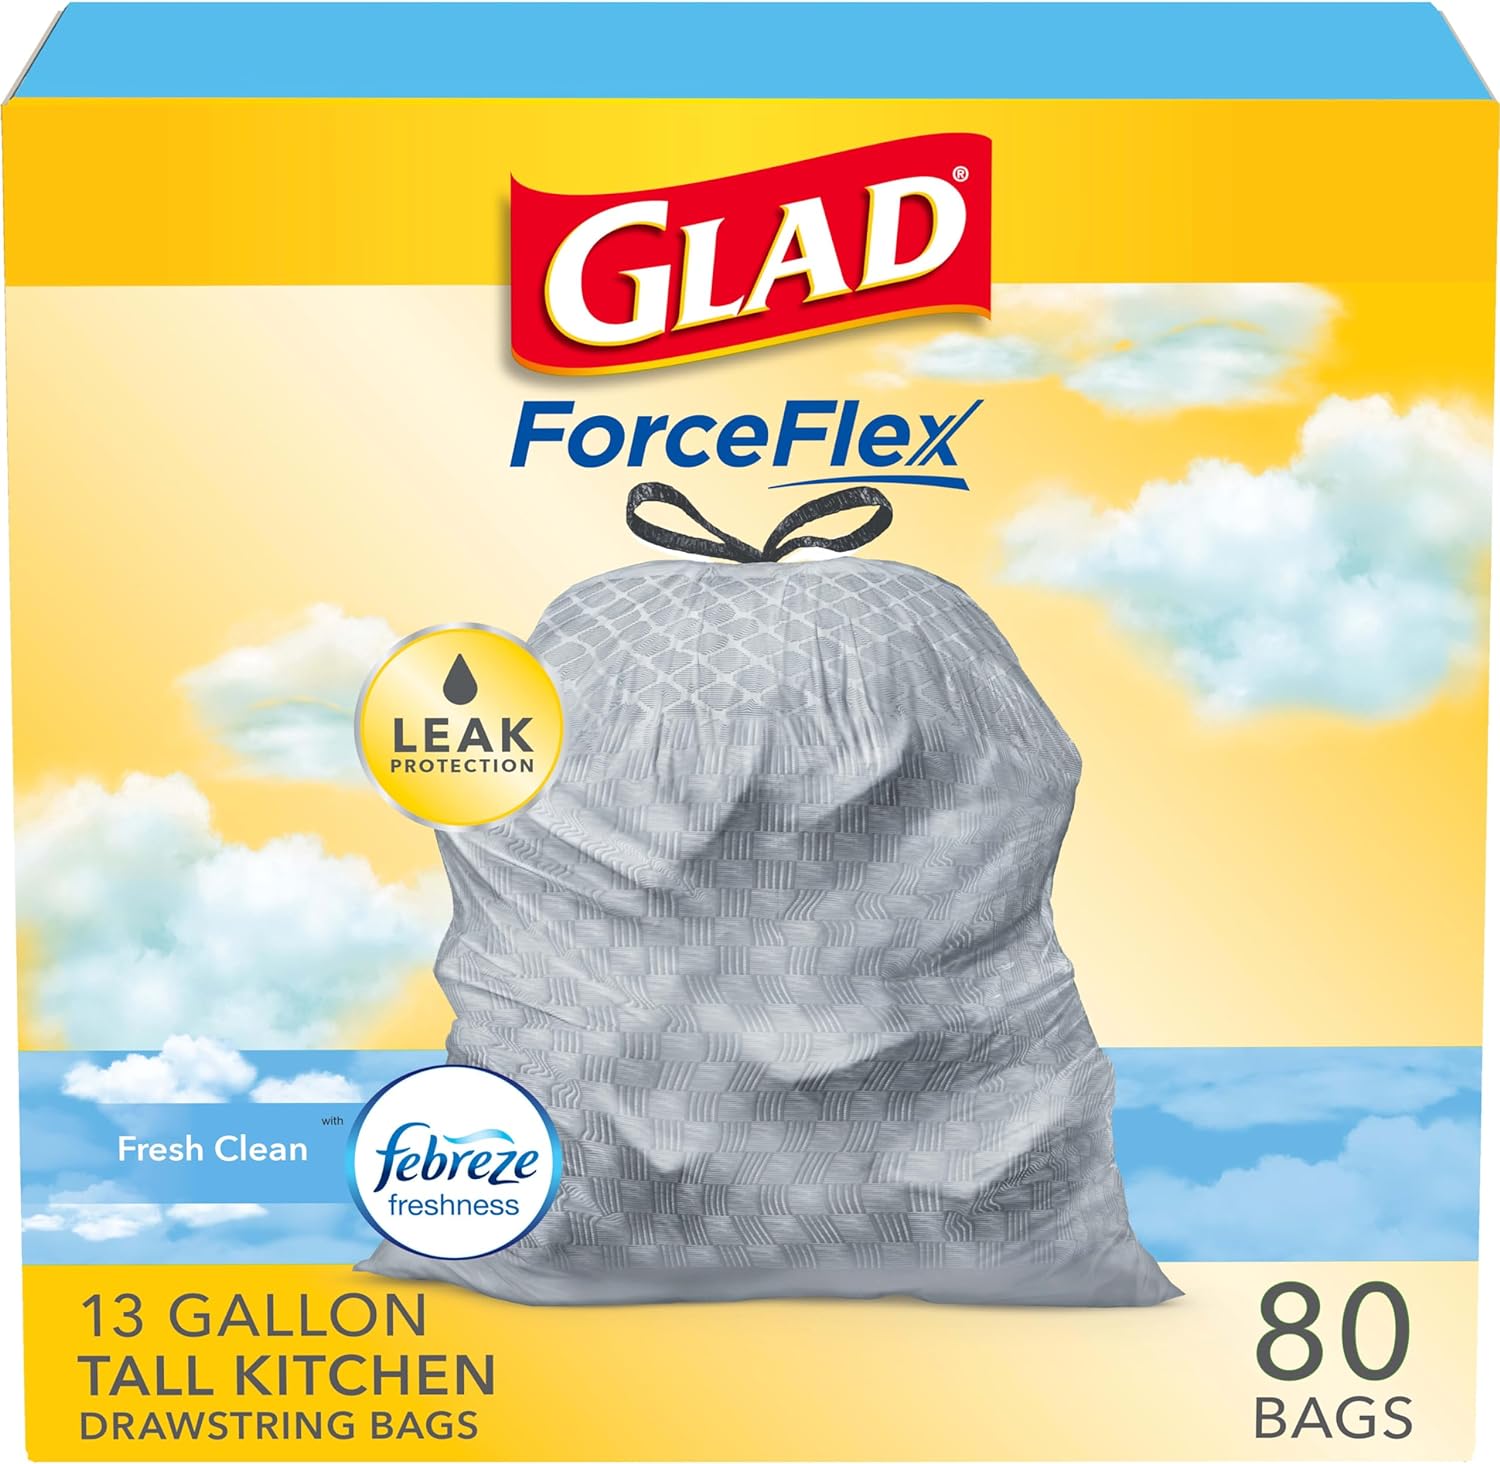 80-Count Glad ForceFlex Tall Kitchen Drawstring Trash Bags (Febreze) $13.90 +$2.60 Promotional Credit w/ S&S + Free Shipping w/ Prime or $35+